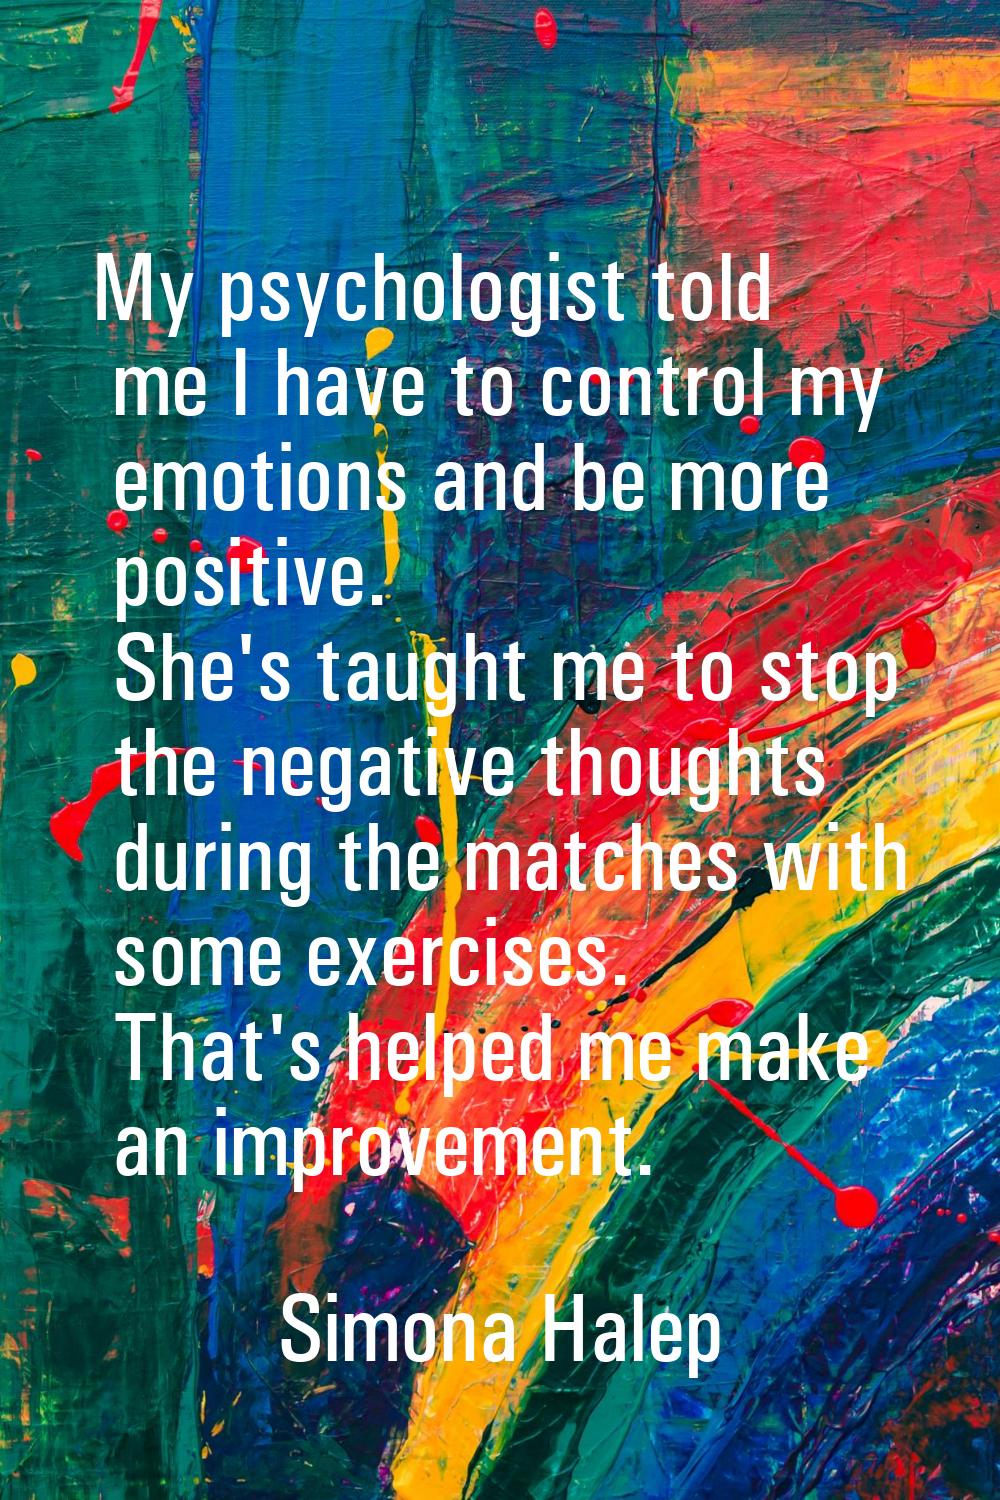 My psychologist told me I have to control my emotions and be more positive. She's taught me to stop